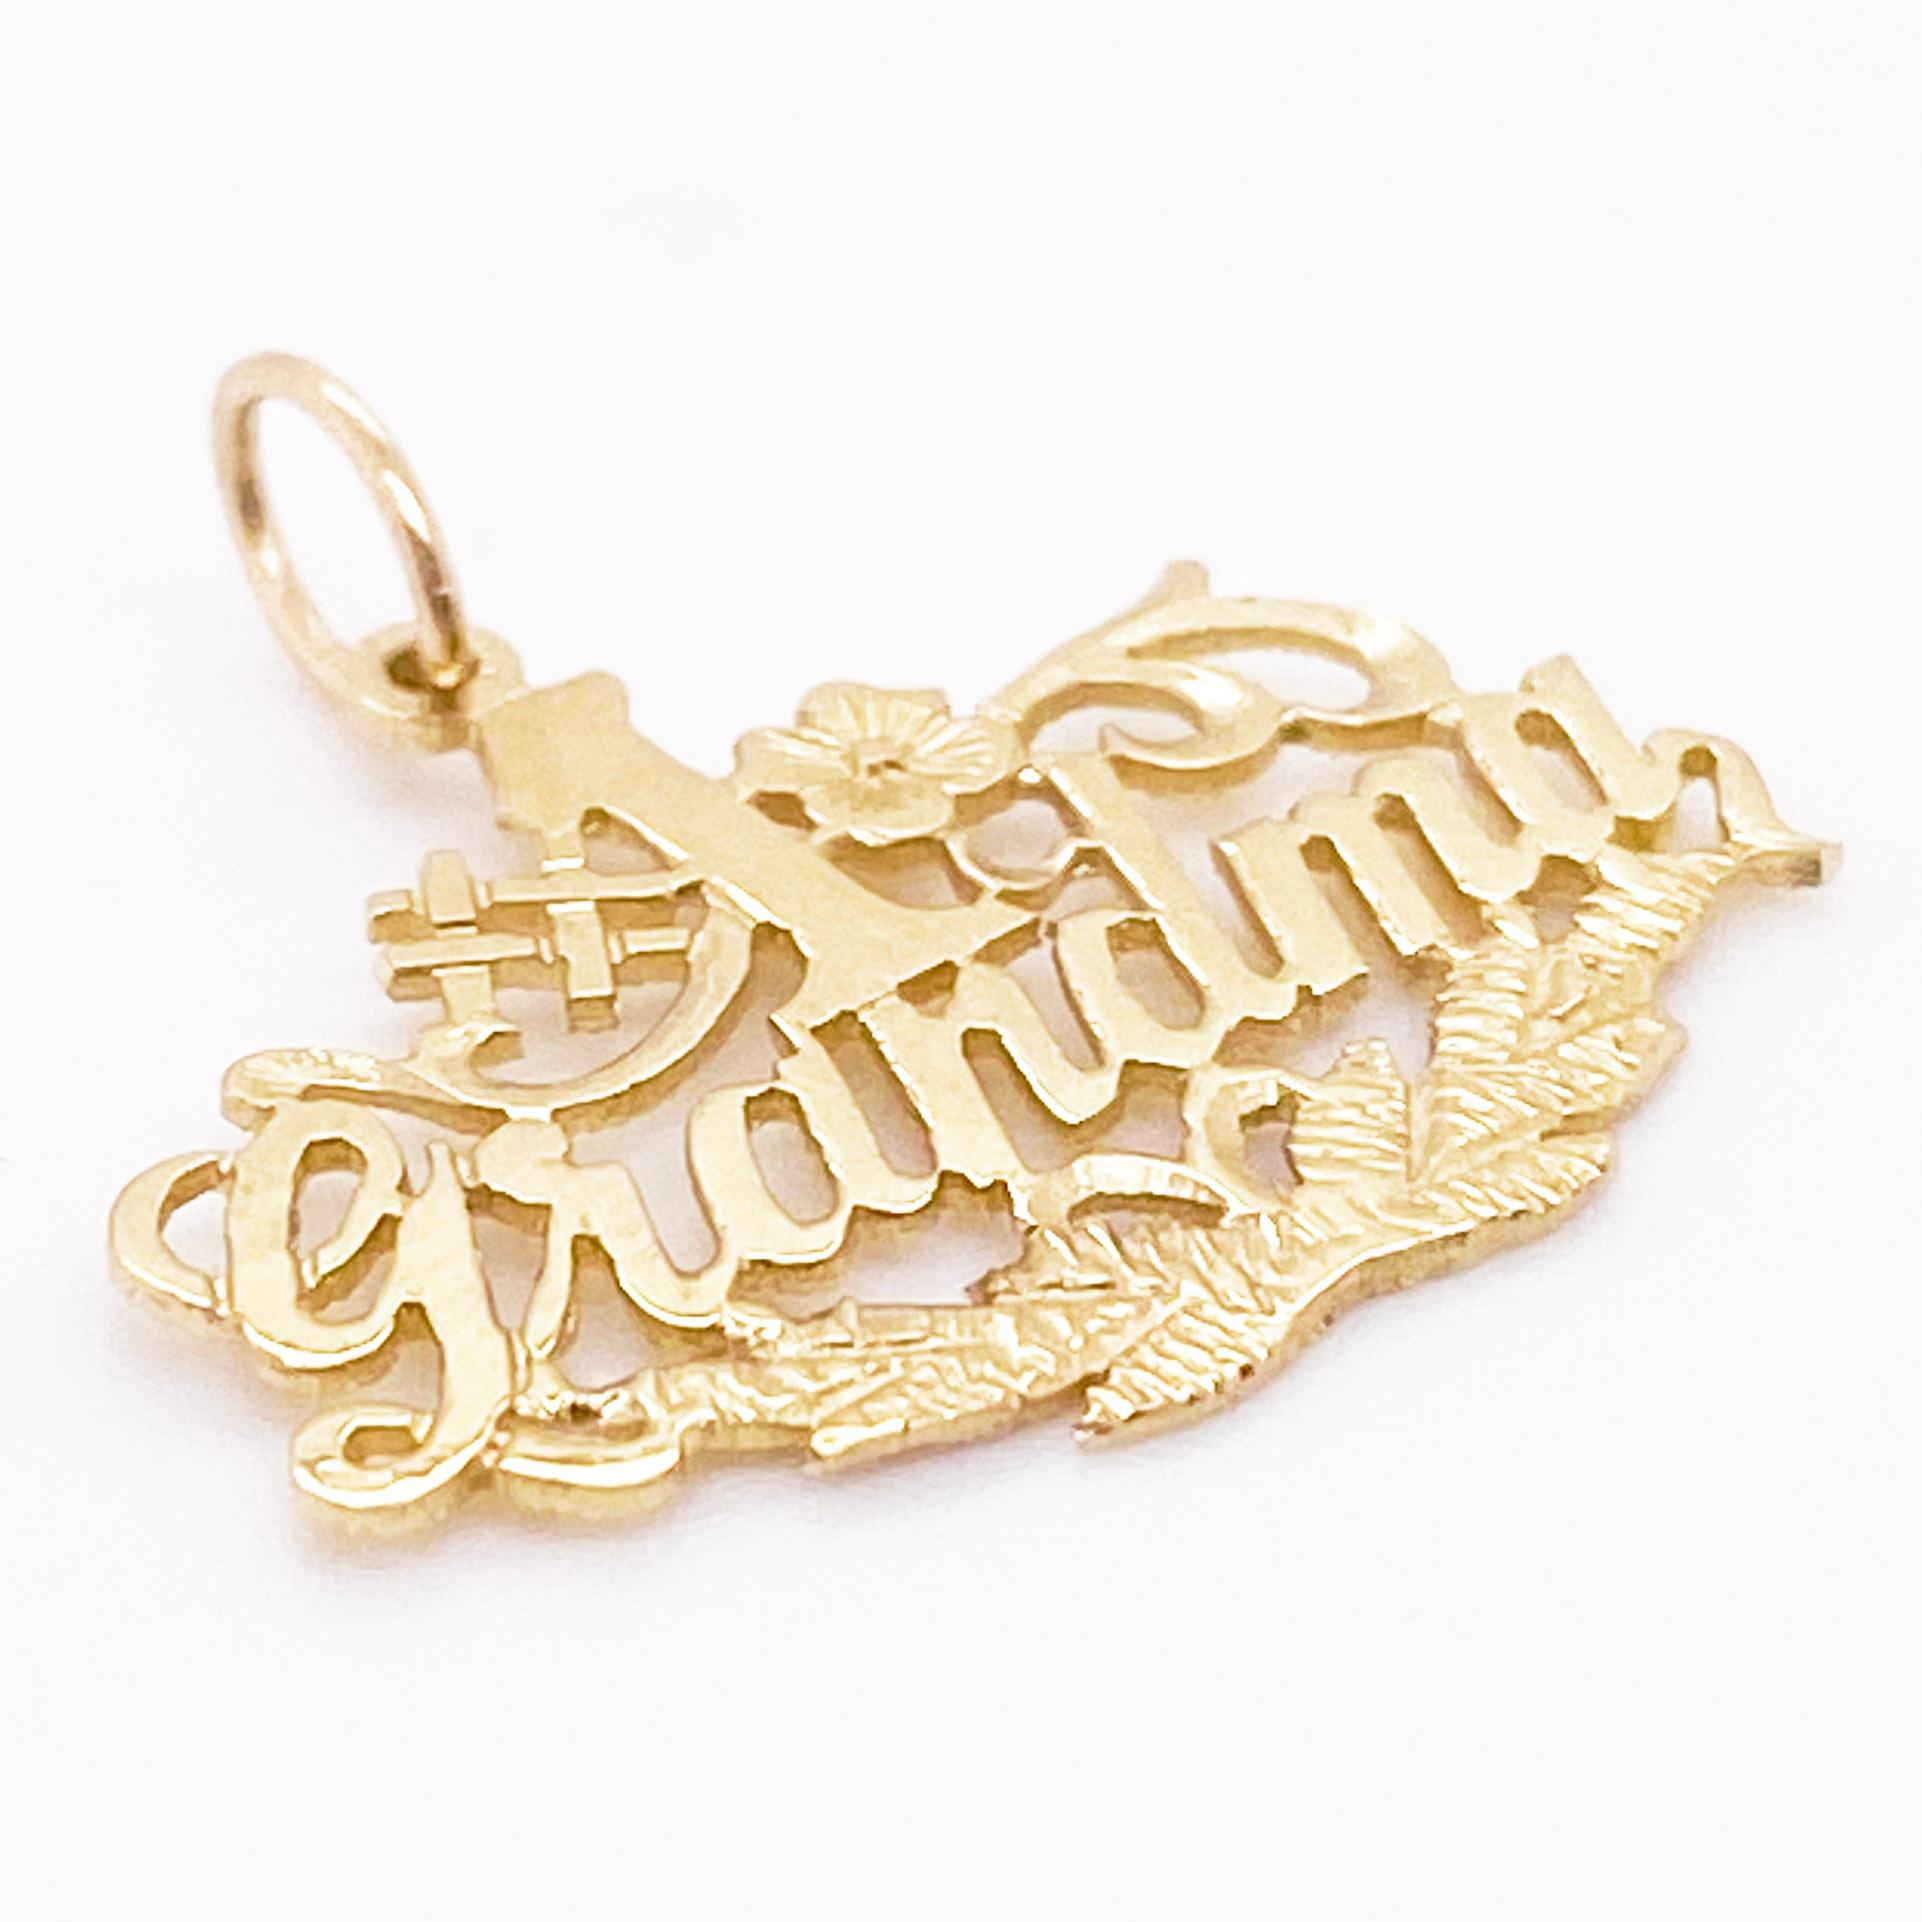 This cute Grandma charm is perfect to recognize the matriarch in your family! It is stamped out of recycled 14 karat yellow gold. It has nice detail and will look good on a charm bracelet or necklace.
 Metal Quality: 14K Yellow Gold
Charm Style: #1